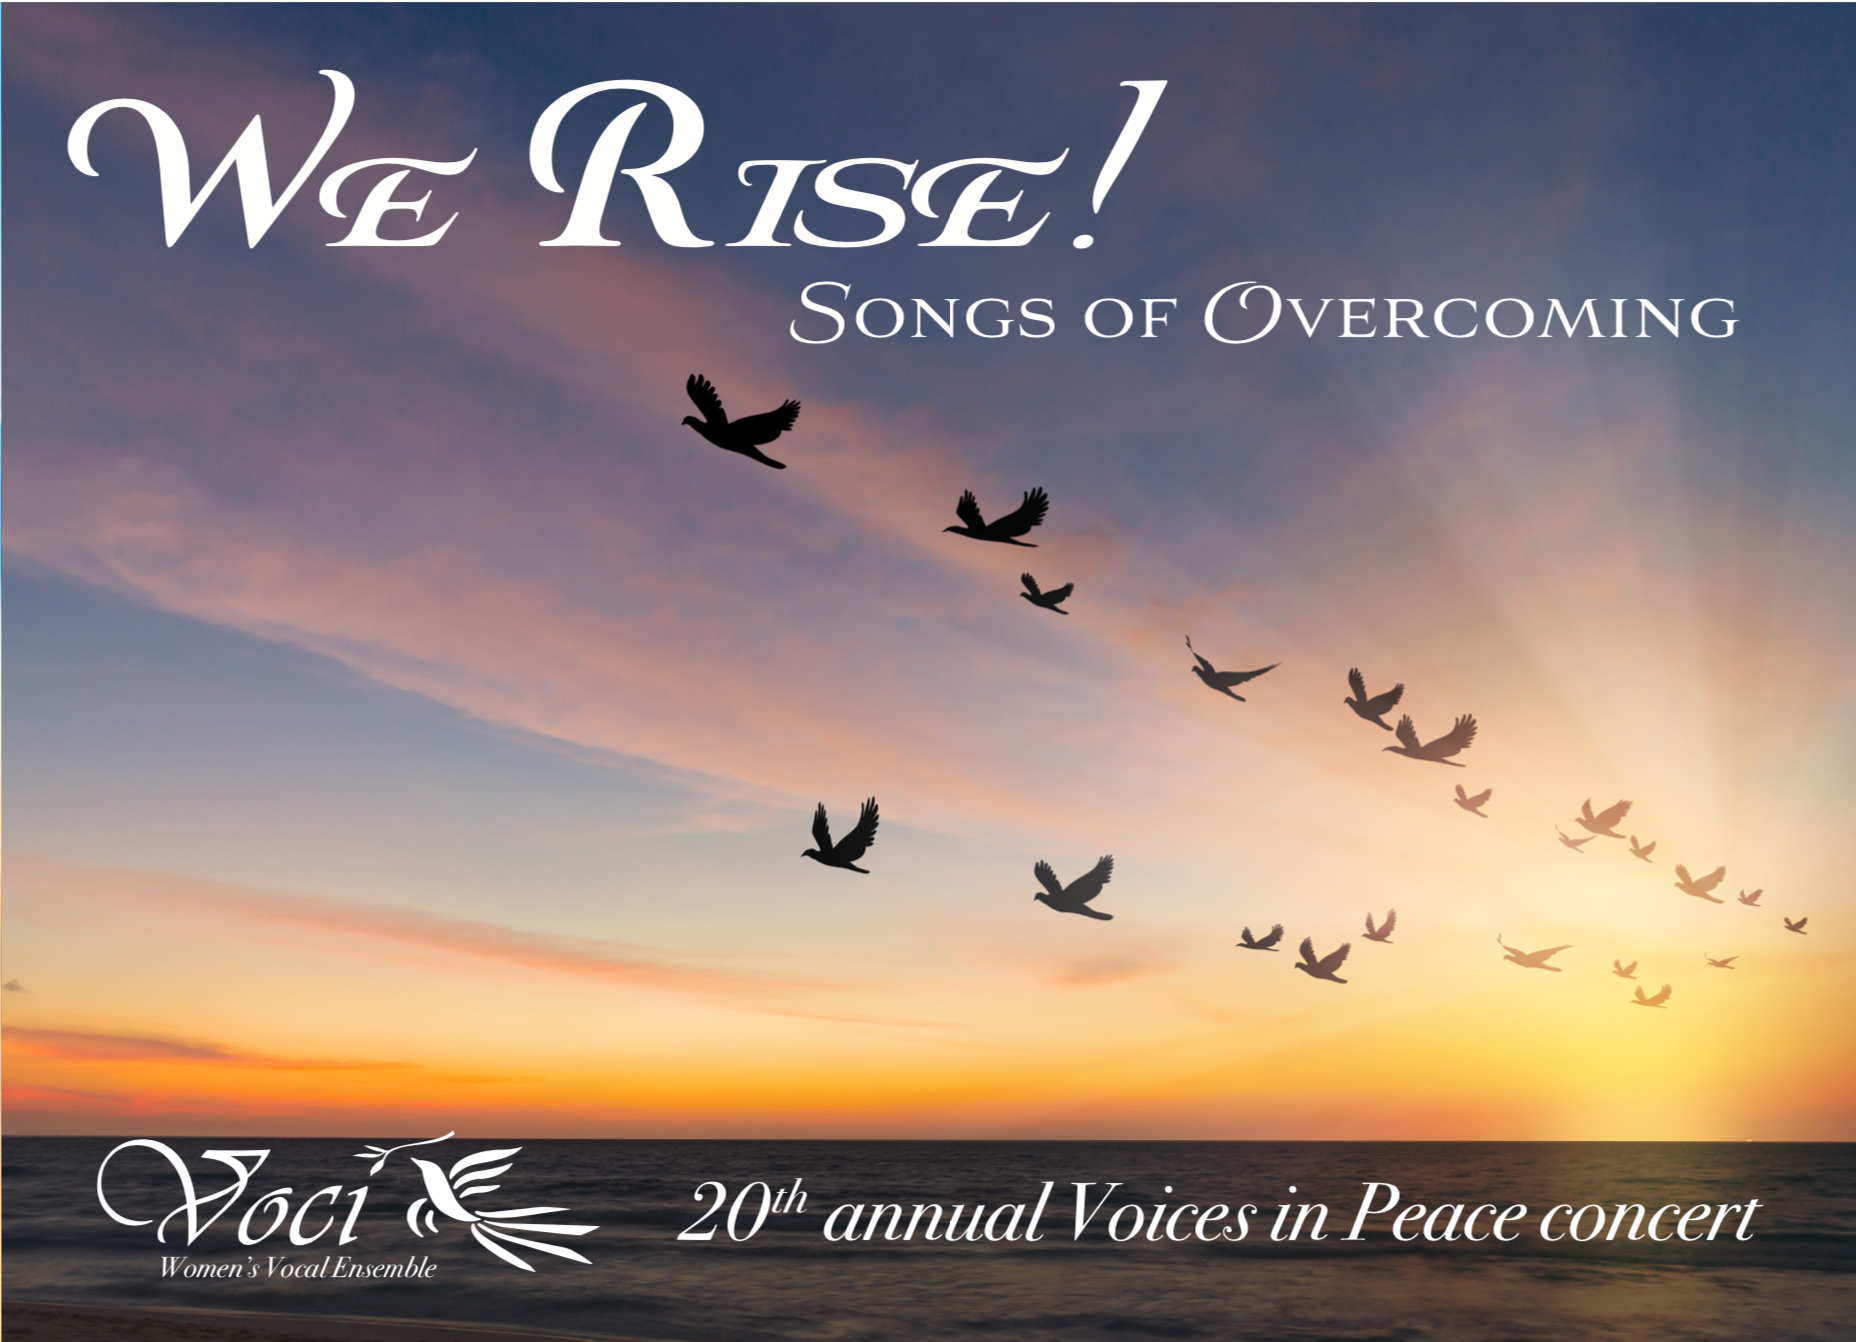 We Rise! Songs of Overcoming